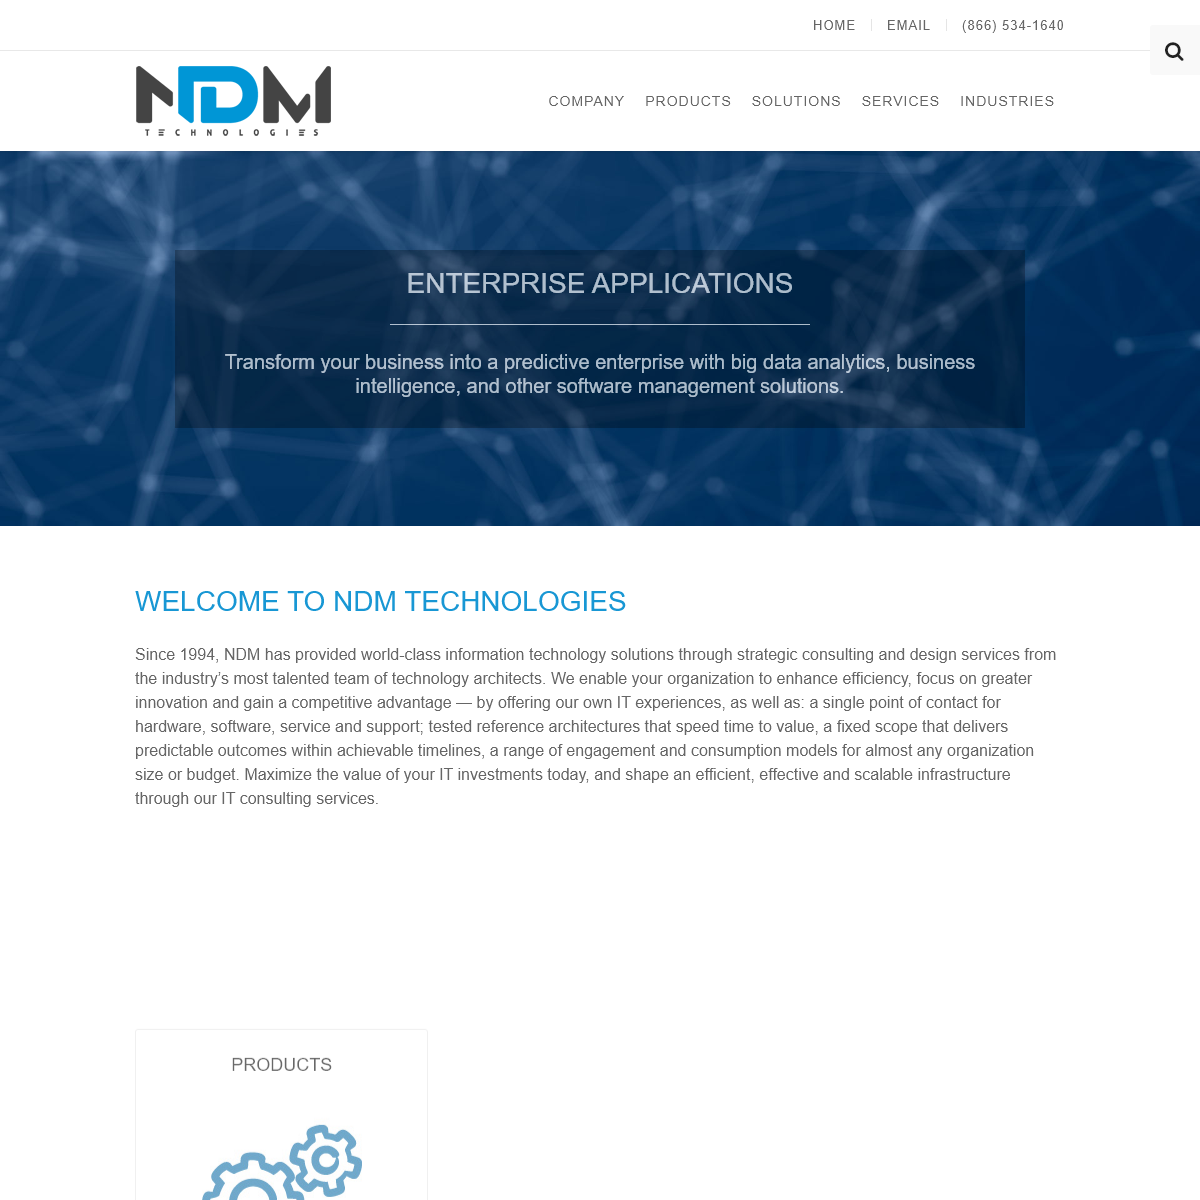 A complete backup of ndm.net